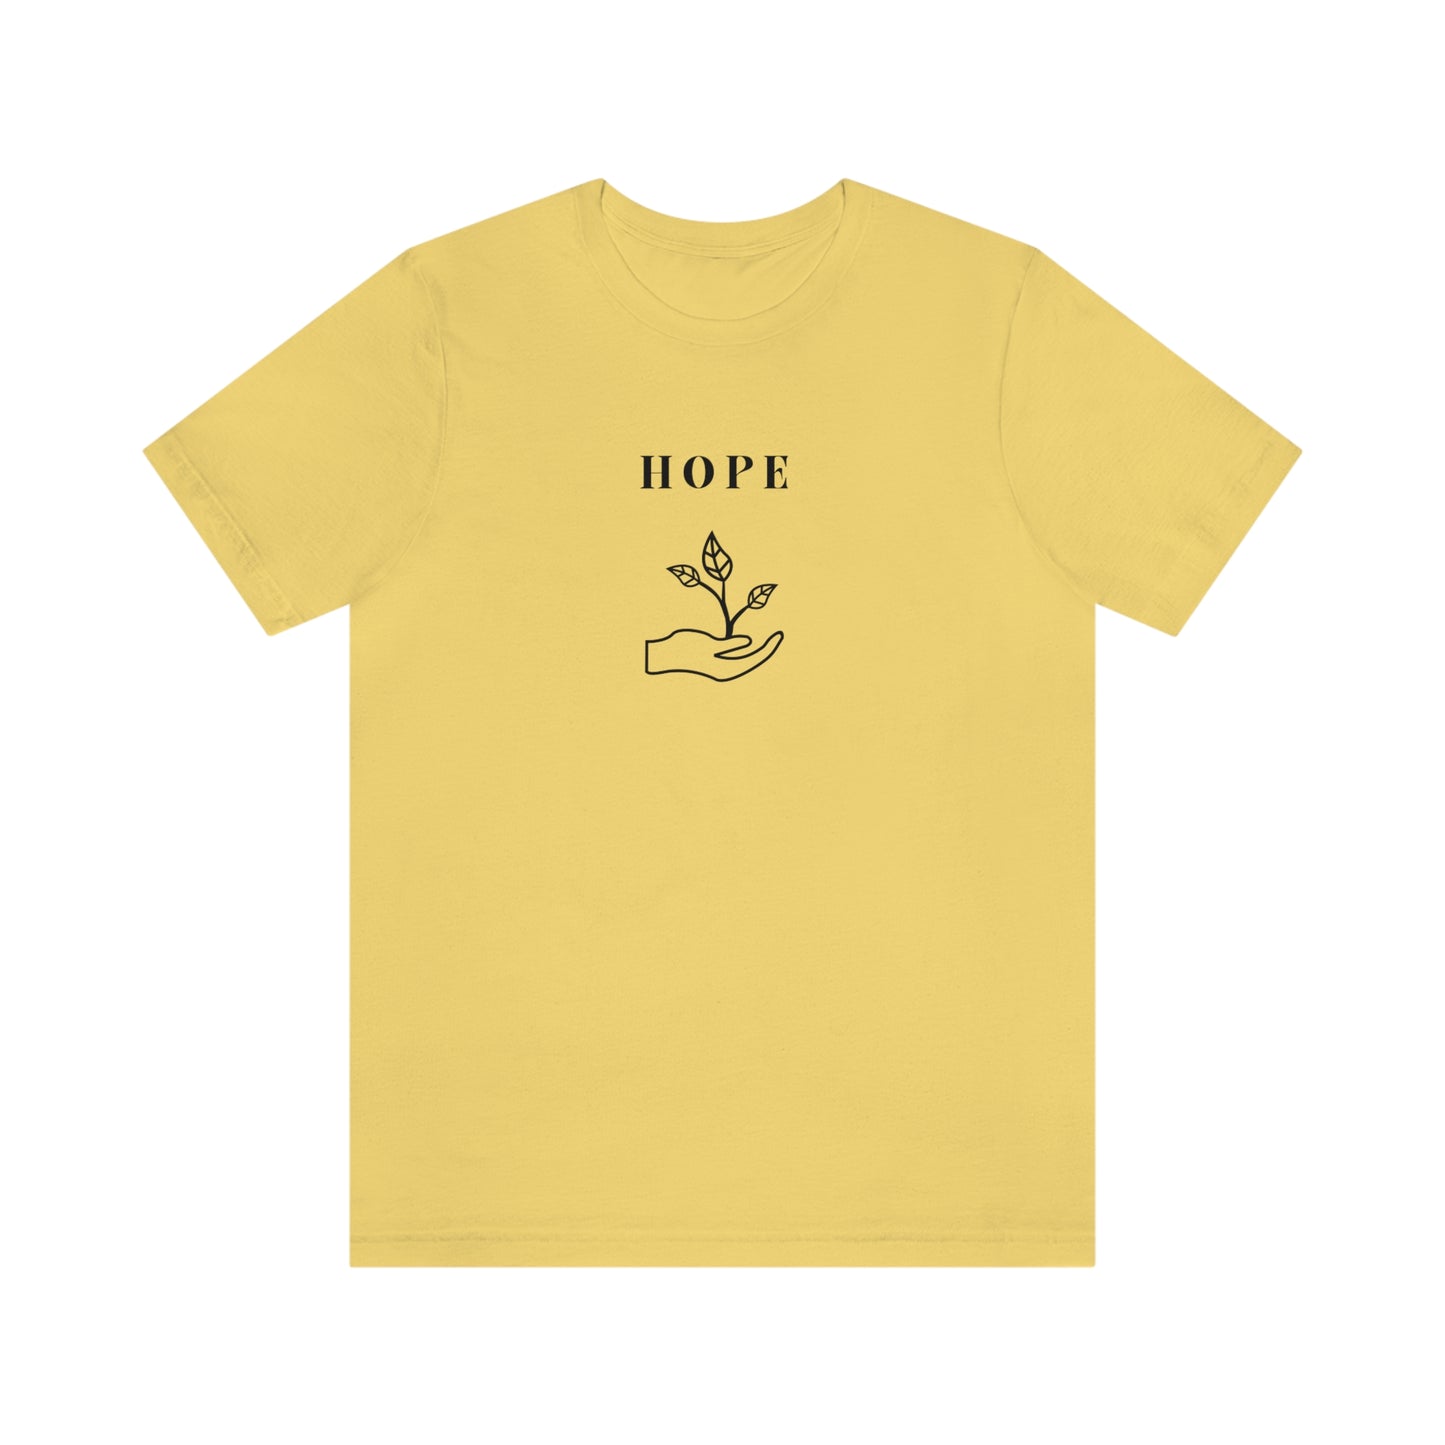 Hope inspirational word tee shirts, tshirts that encourage t shirts for friends gift t shirt gifts for loved ones